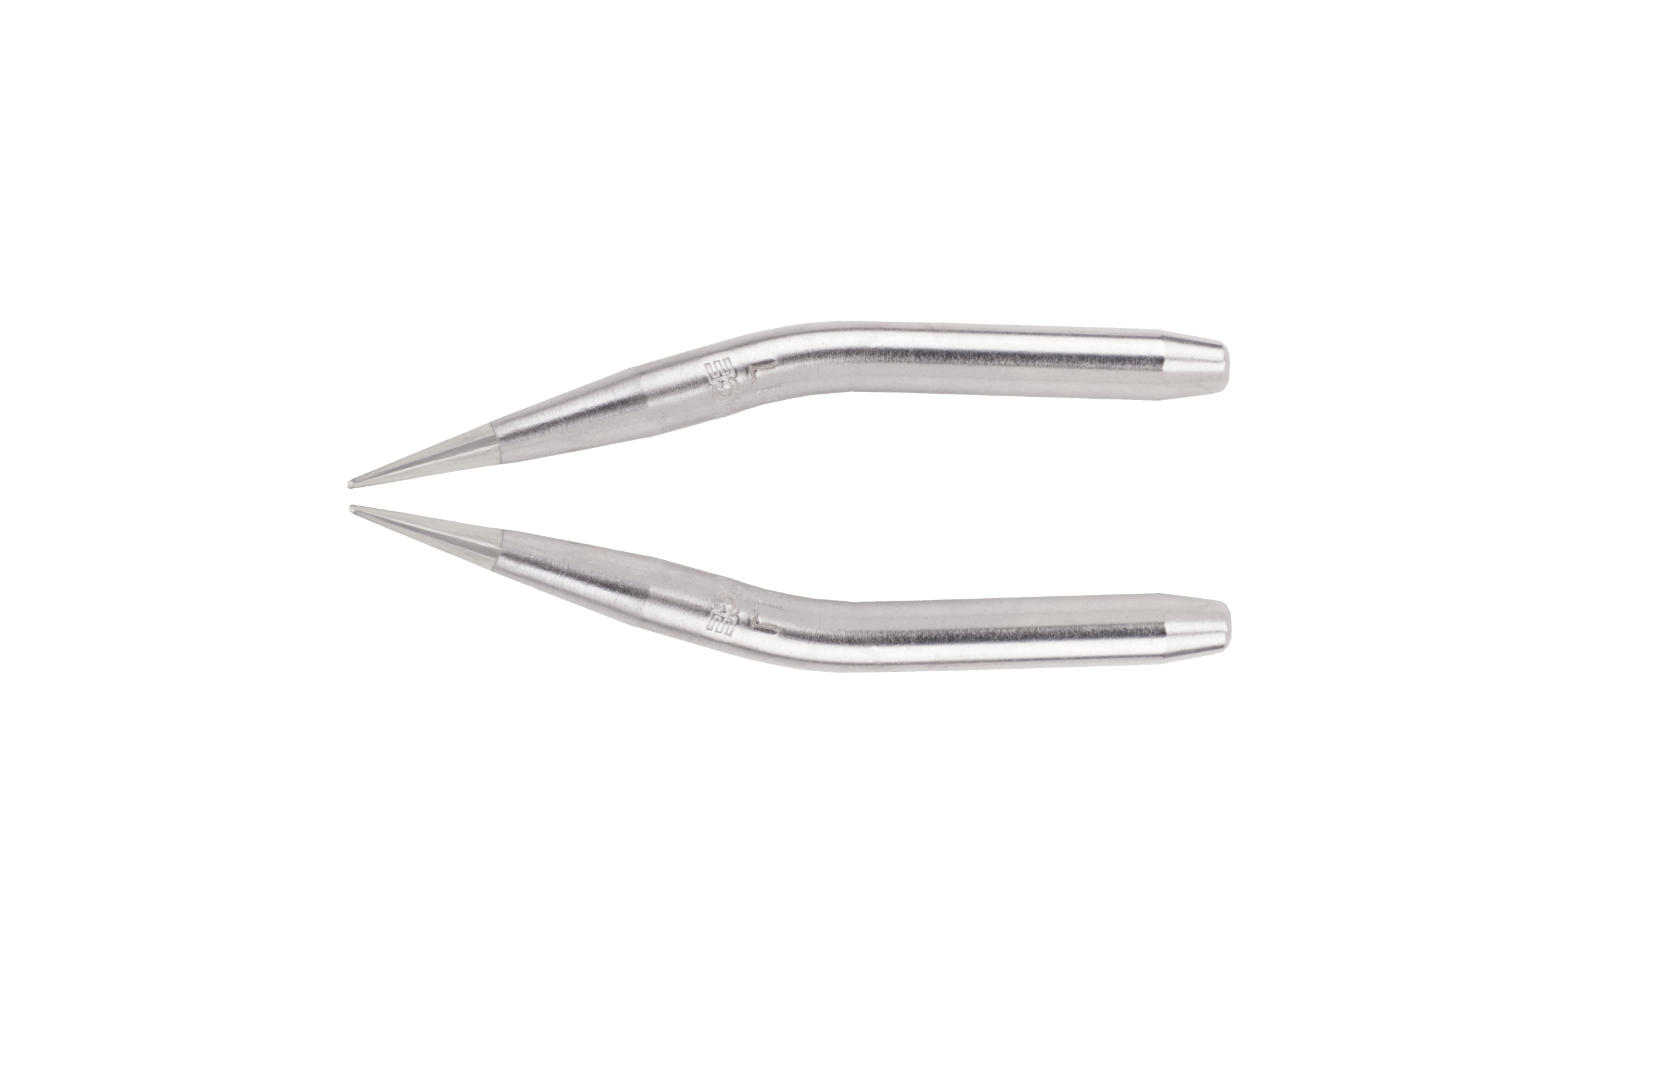 1/64" Angled Fine Point Conical Tips